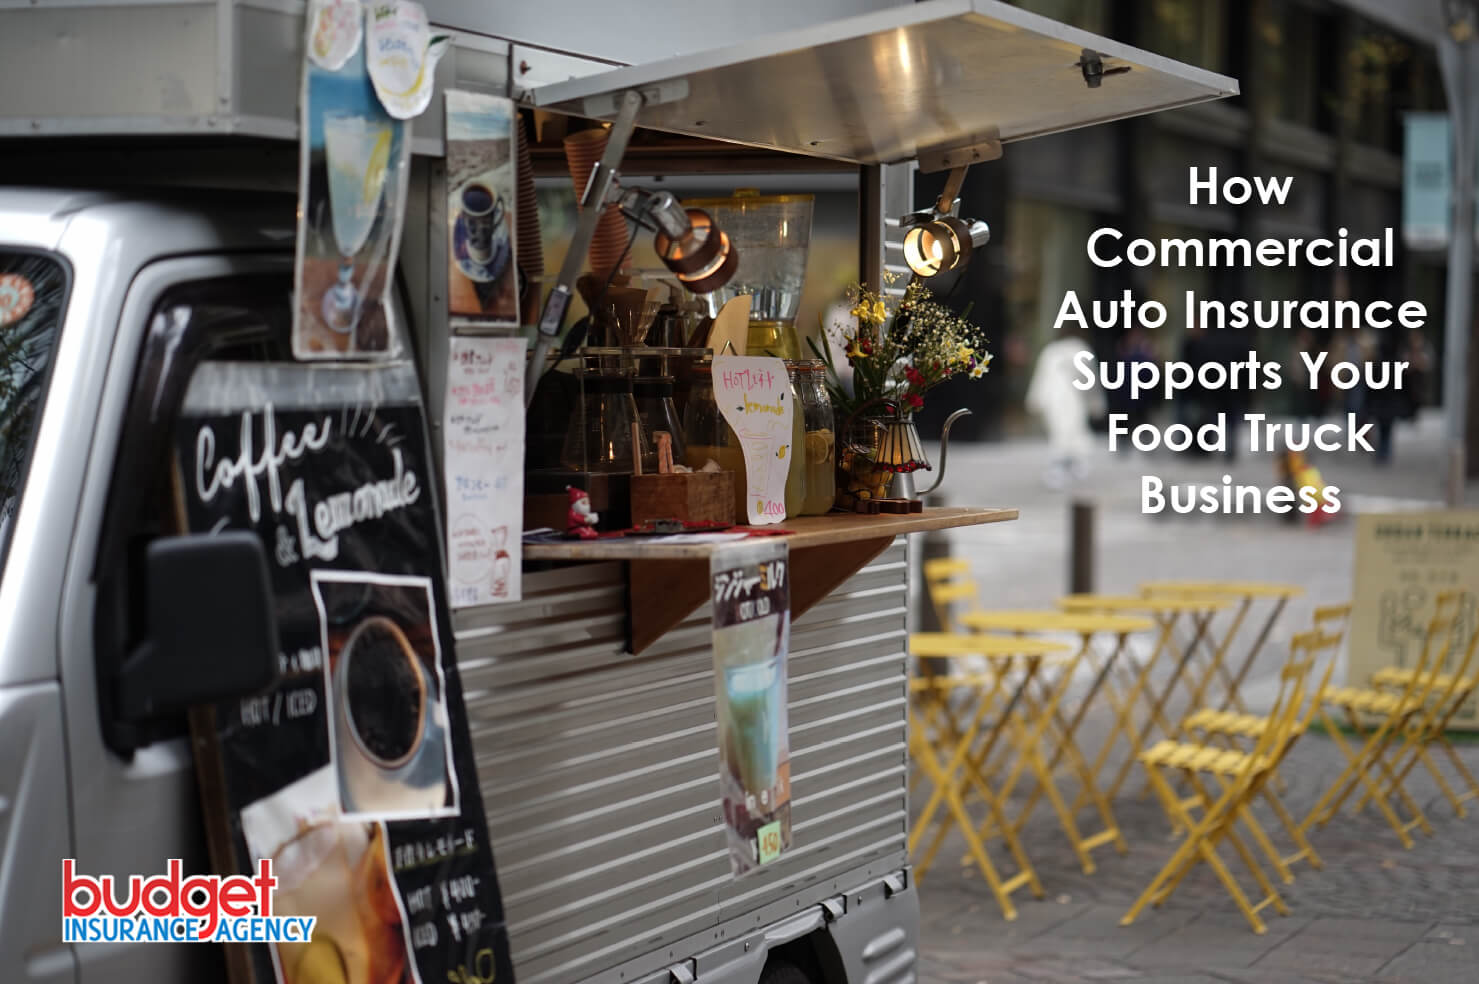 How Commercial Auto Insurance Supports Your Food Truck Business